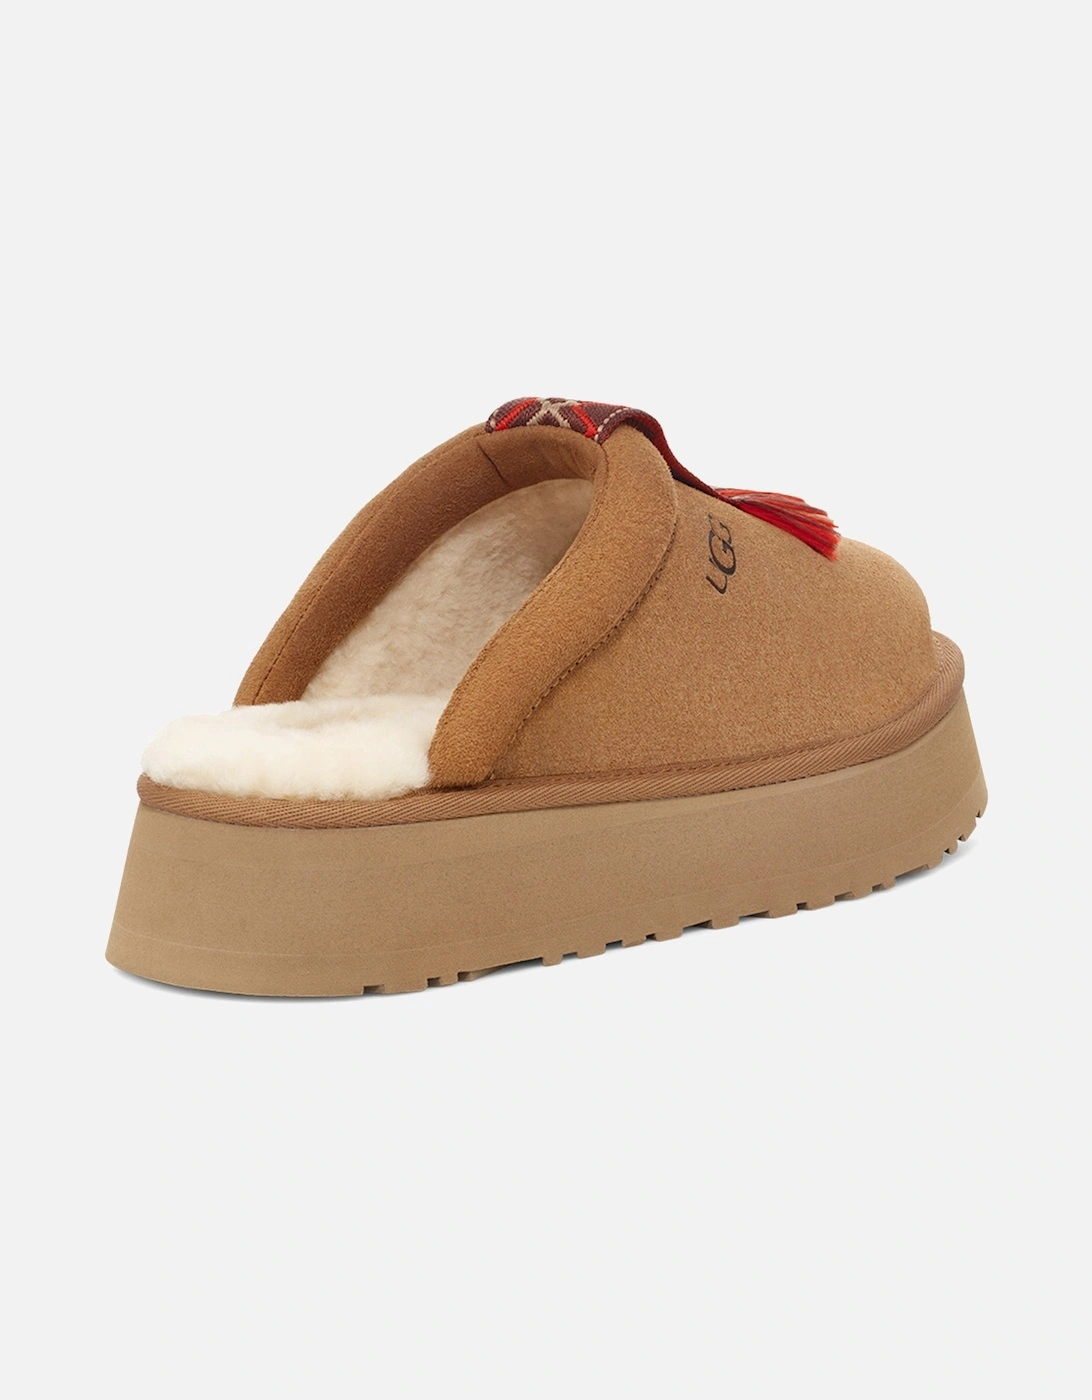 Womens Tazzle Slippers (Chestnut)